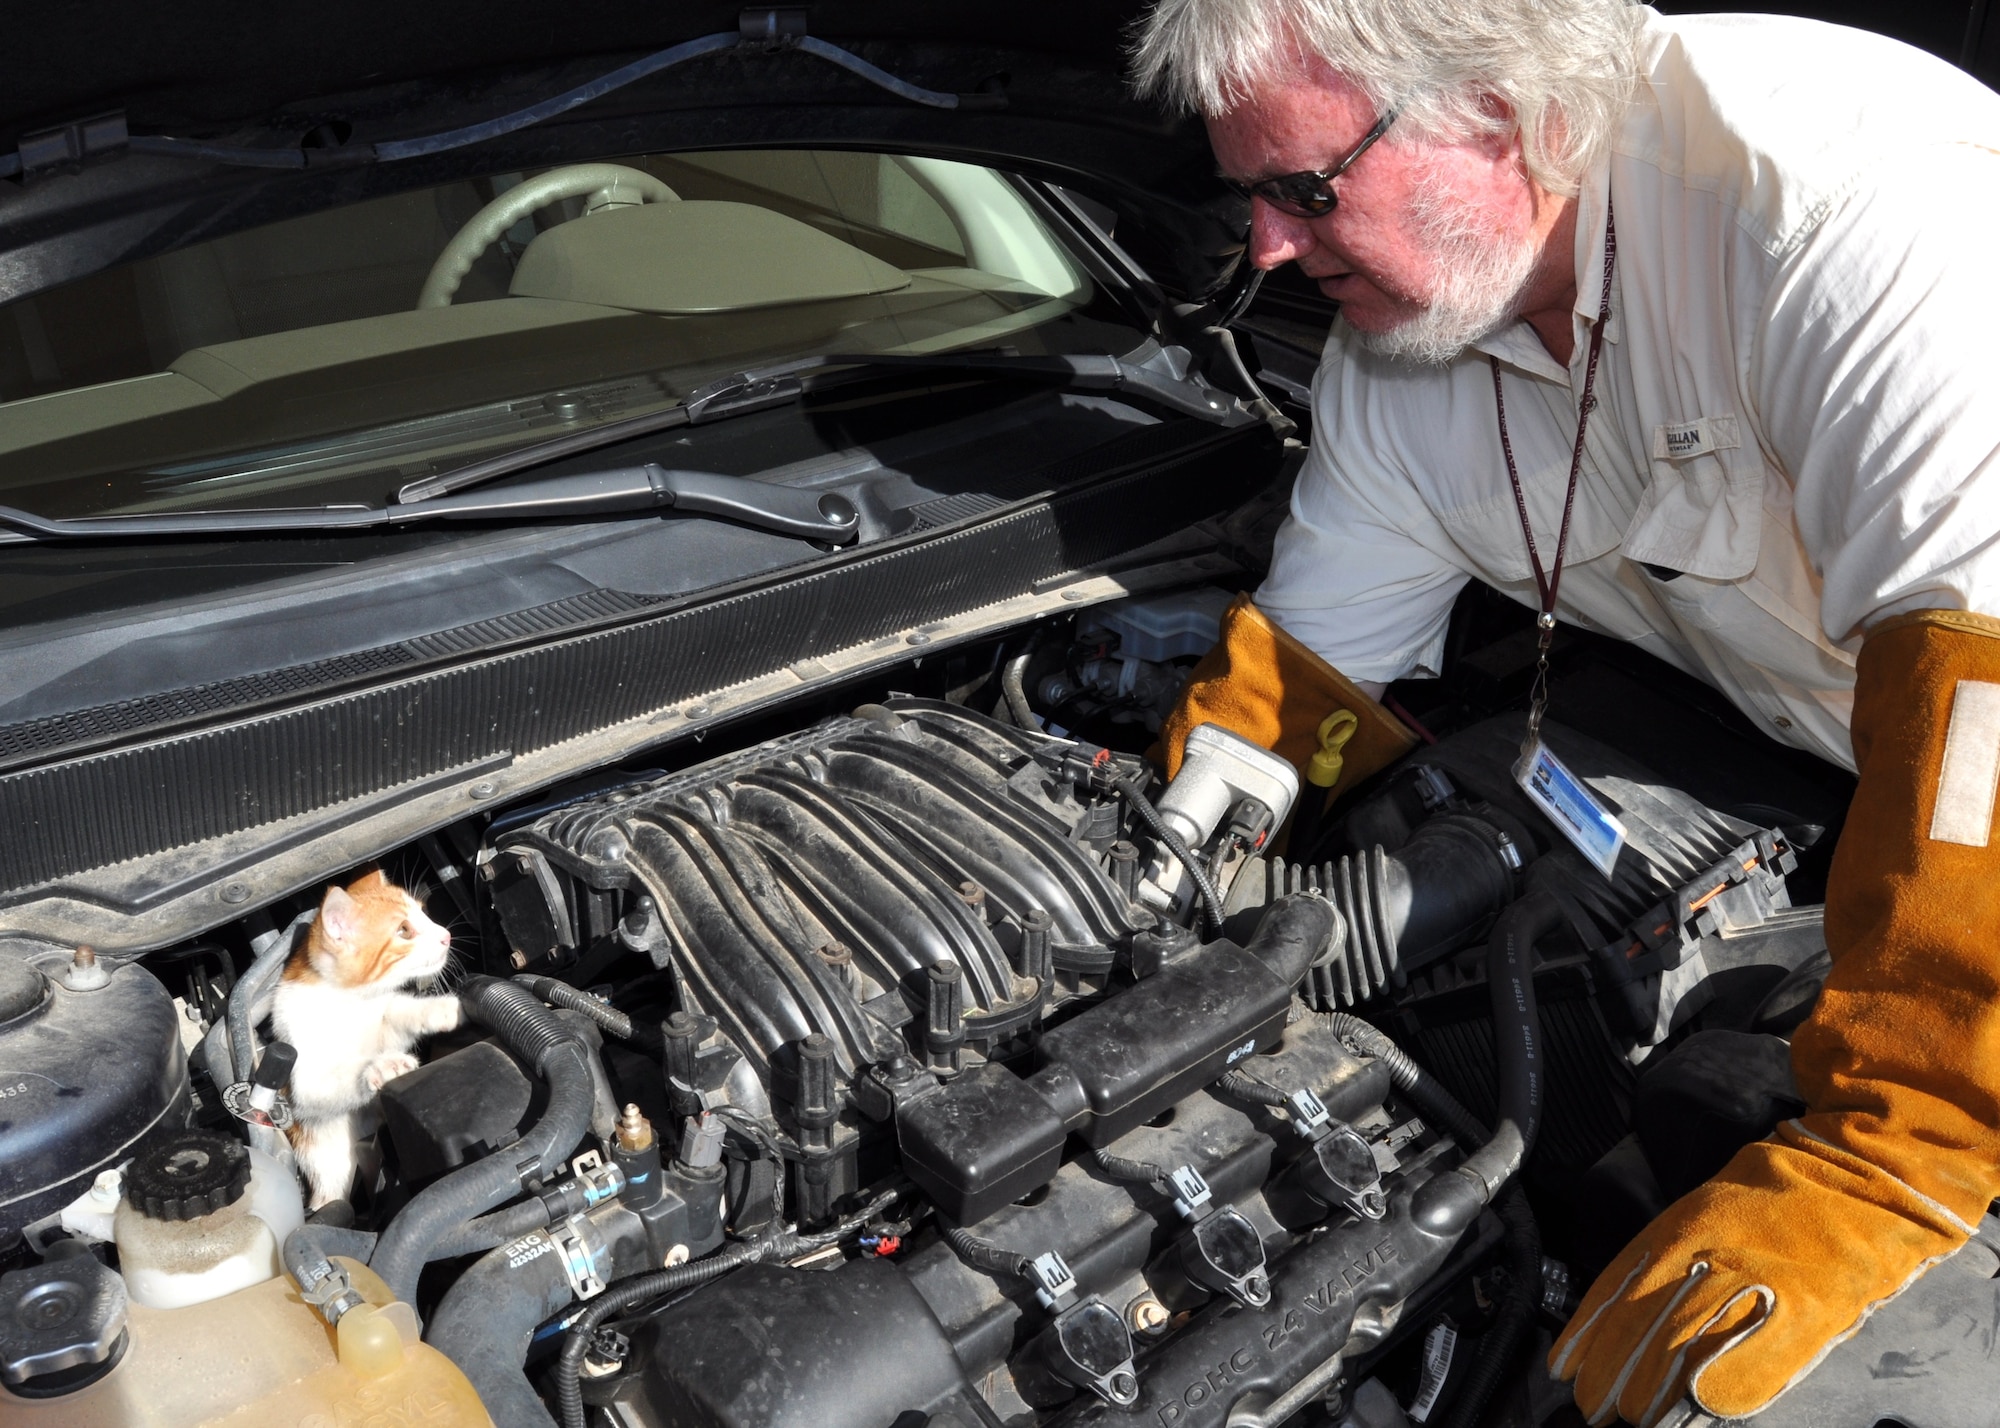 Phillip Remel, CSC pest management, attempts to encourage one of the kittens to exit the engine block, but the young feline had no intention of leaving, retreating behind the engine.  (U.S. Air Force photo by Steve Pivnick)